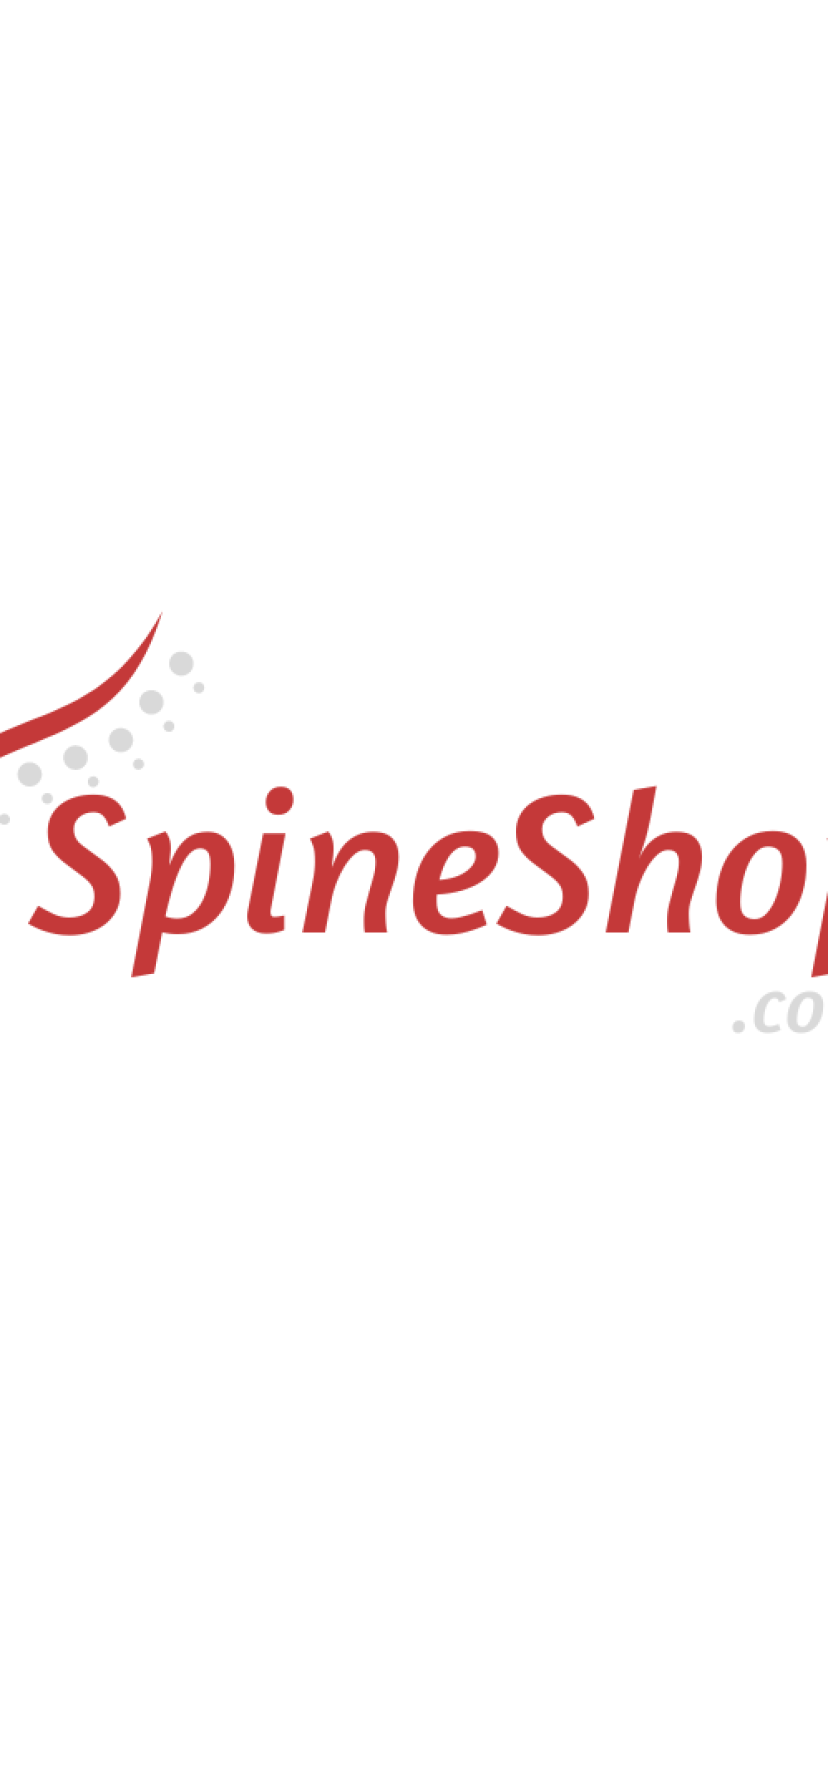 spineshop.com domain is for sale